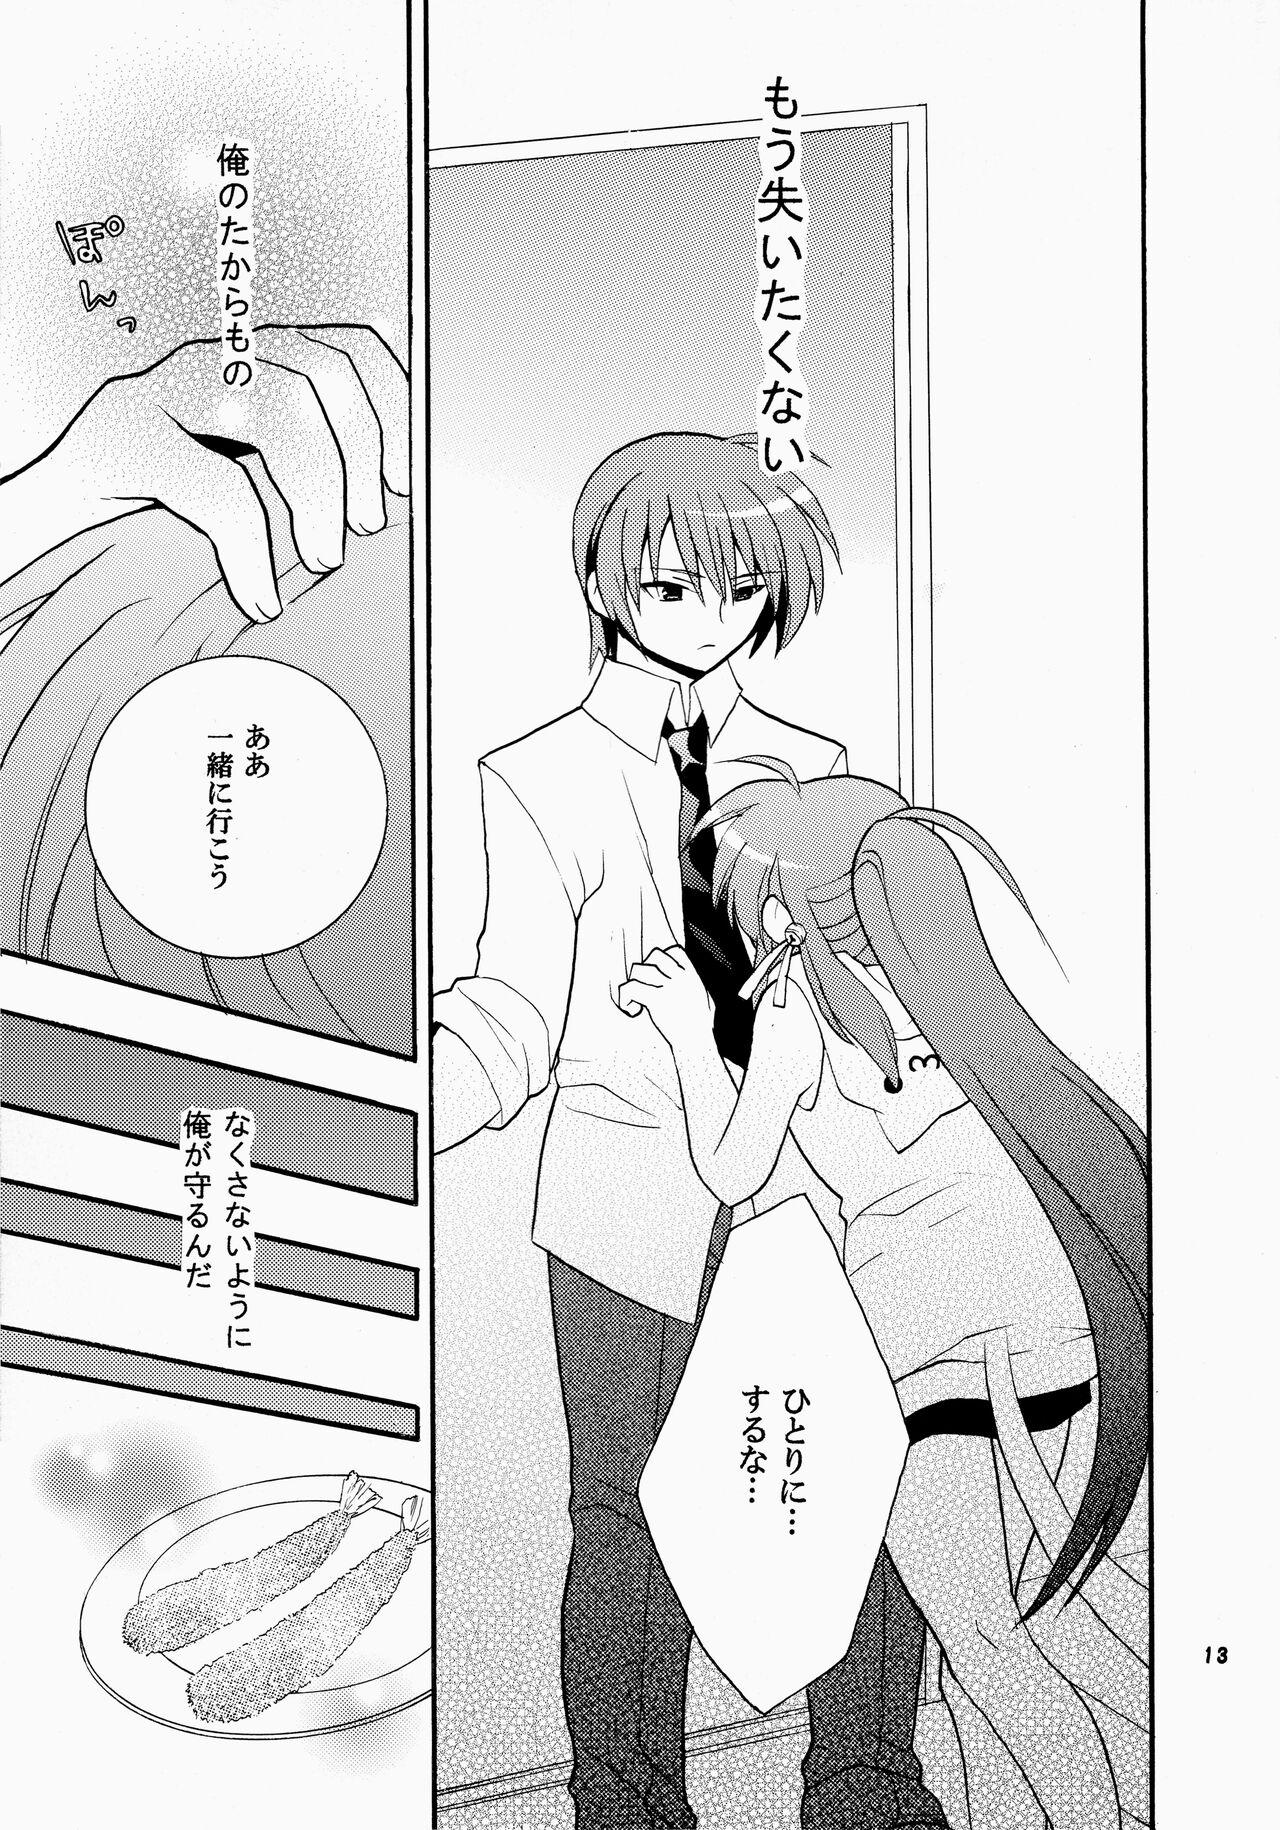 Ass Futari Bocchi - Little busters Moan - Page 13